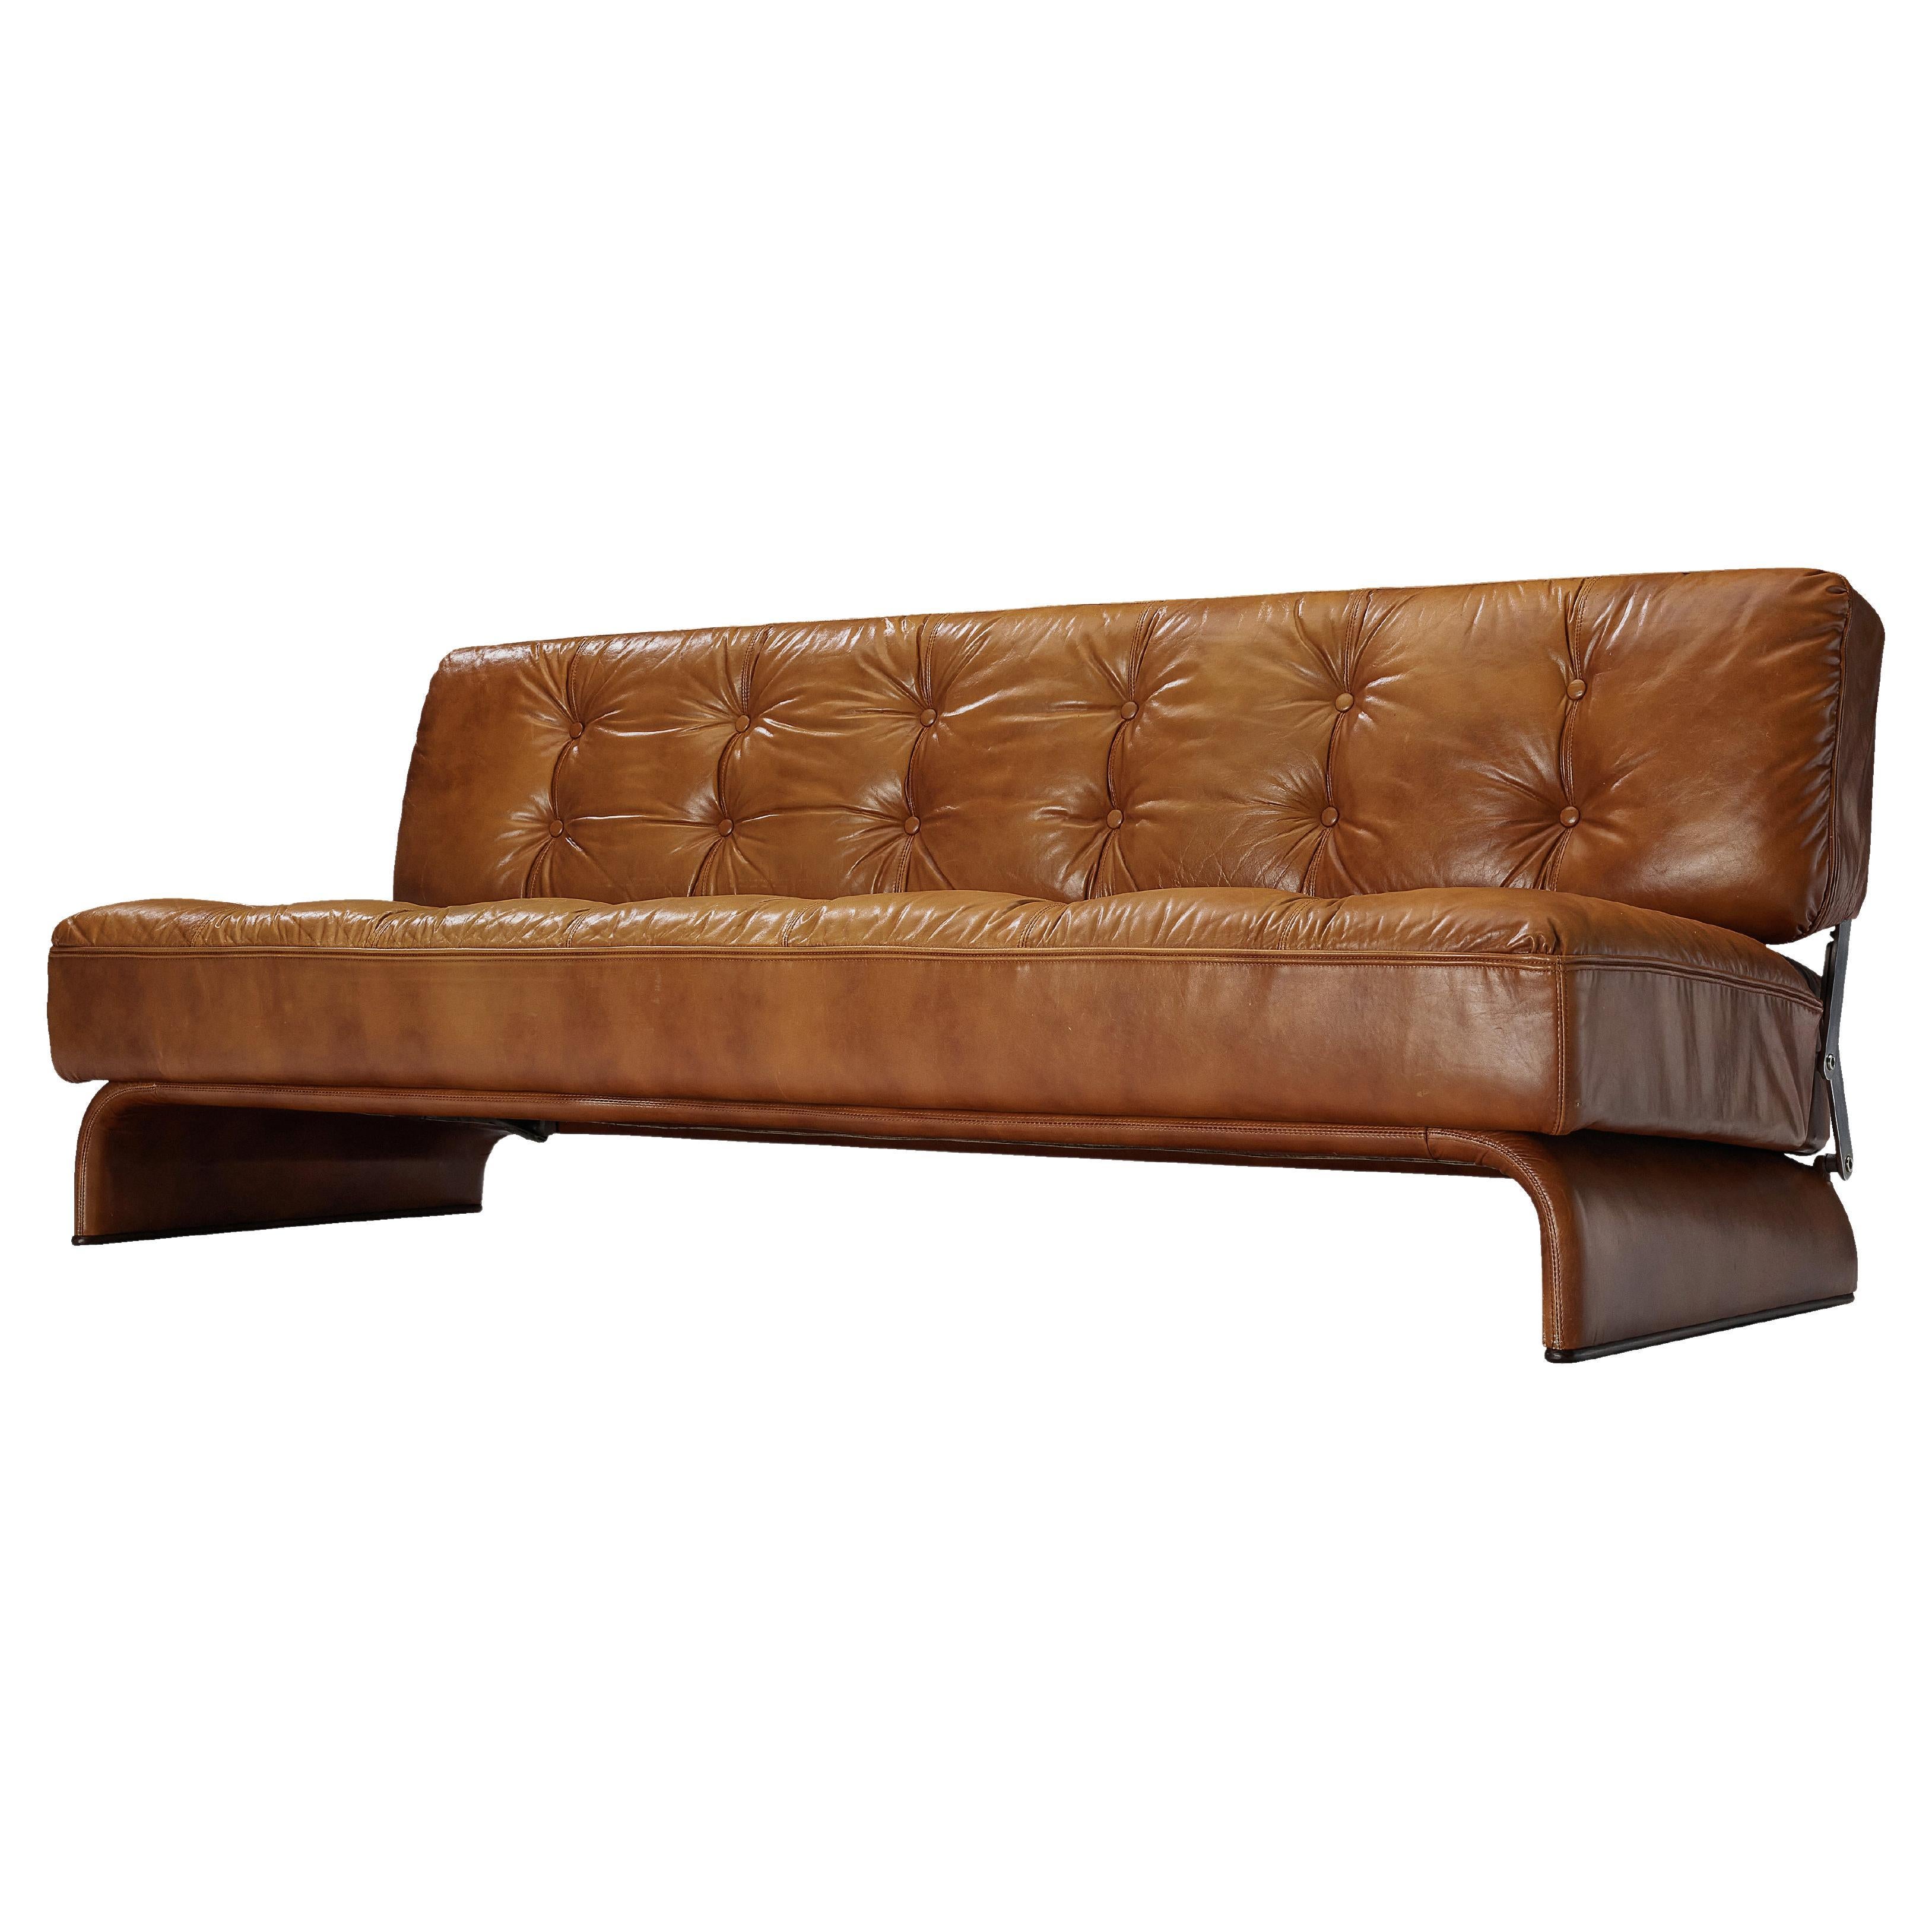 Johannes Spalt for Wittmann, 'Constanze' daybed or sofa, cognac leather, metal, Austria, 1960s. 

This sofa or daybed, designed by architect Johannes Spalt, is typical for mid-century modern design from Austria of the 1960s. The tufted cognac